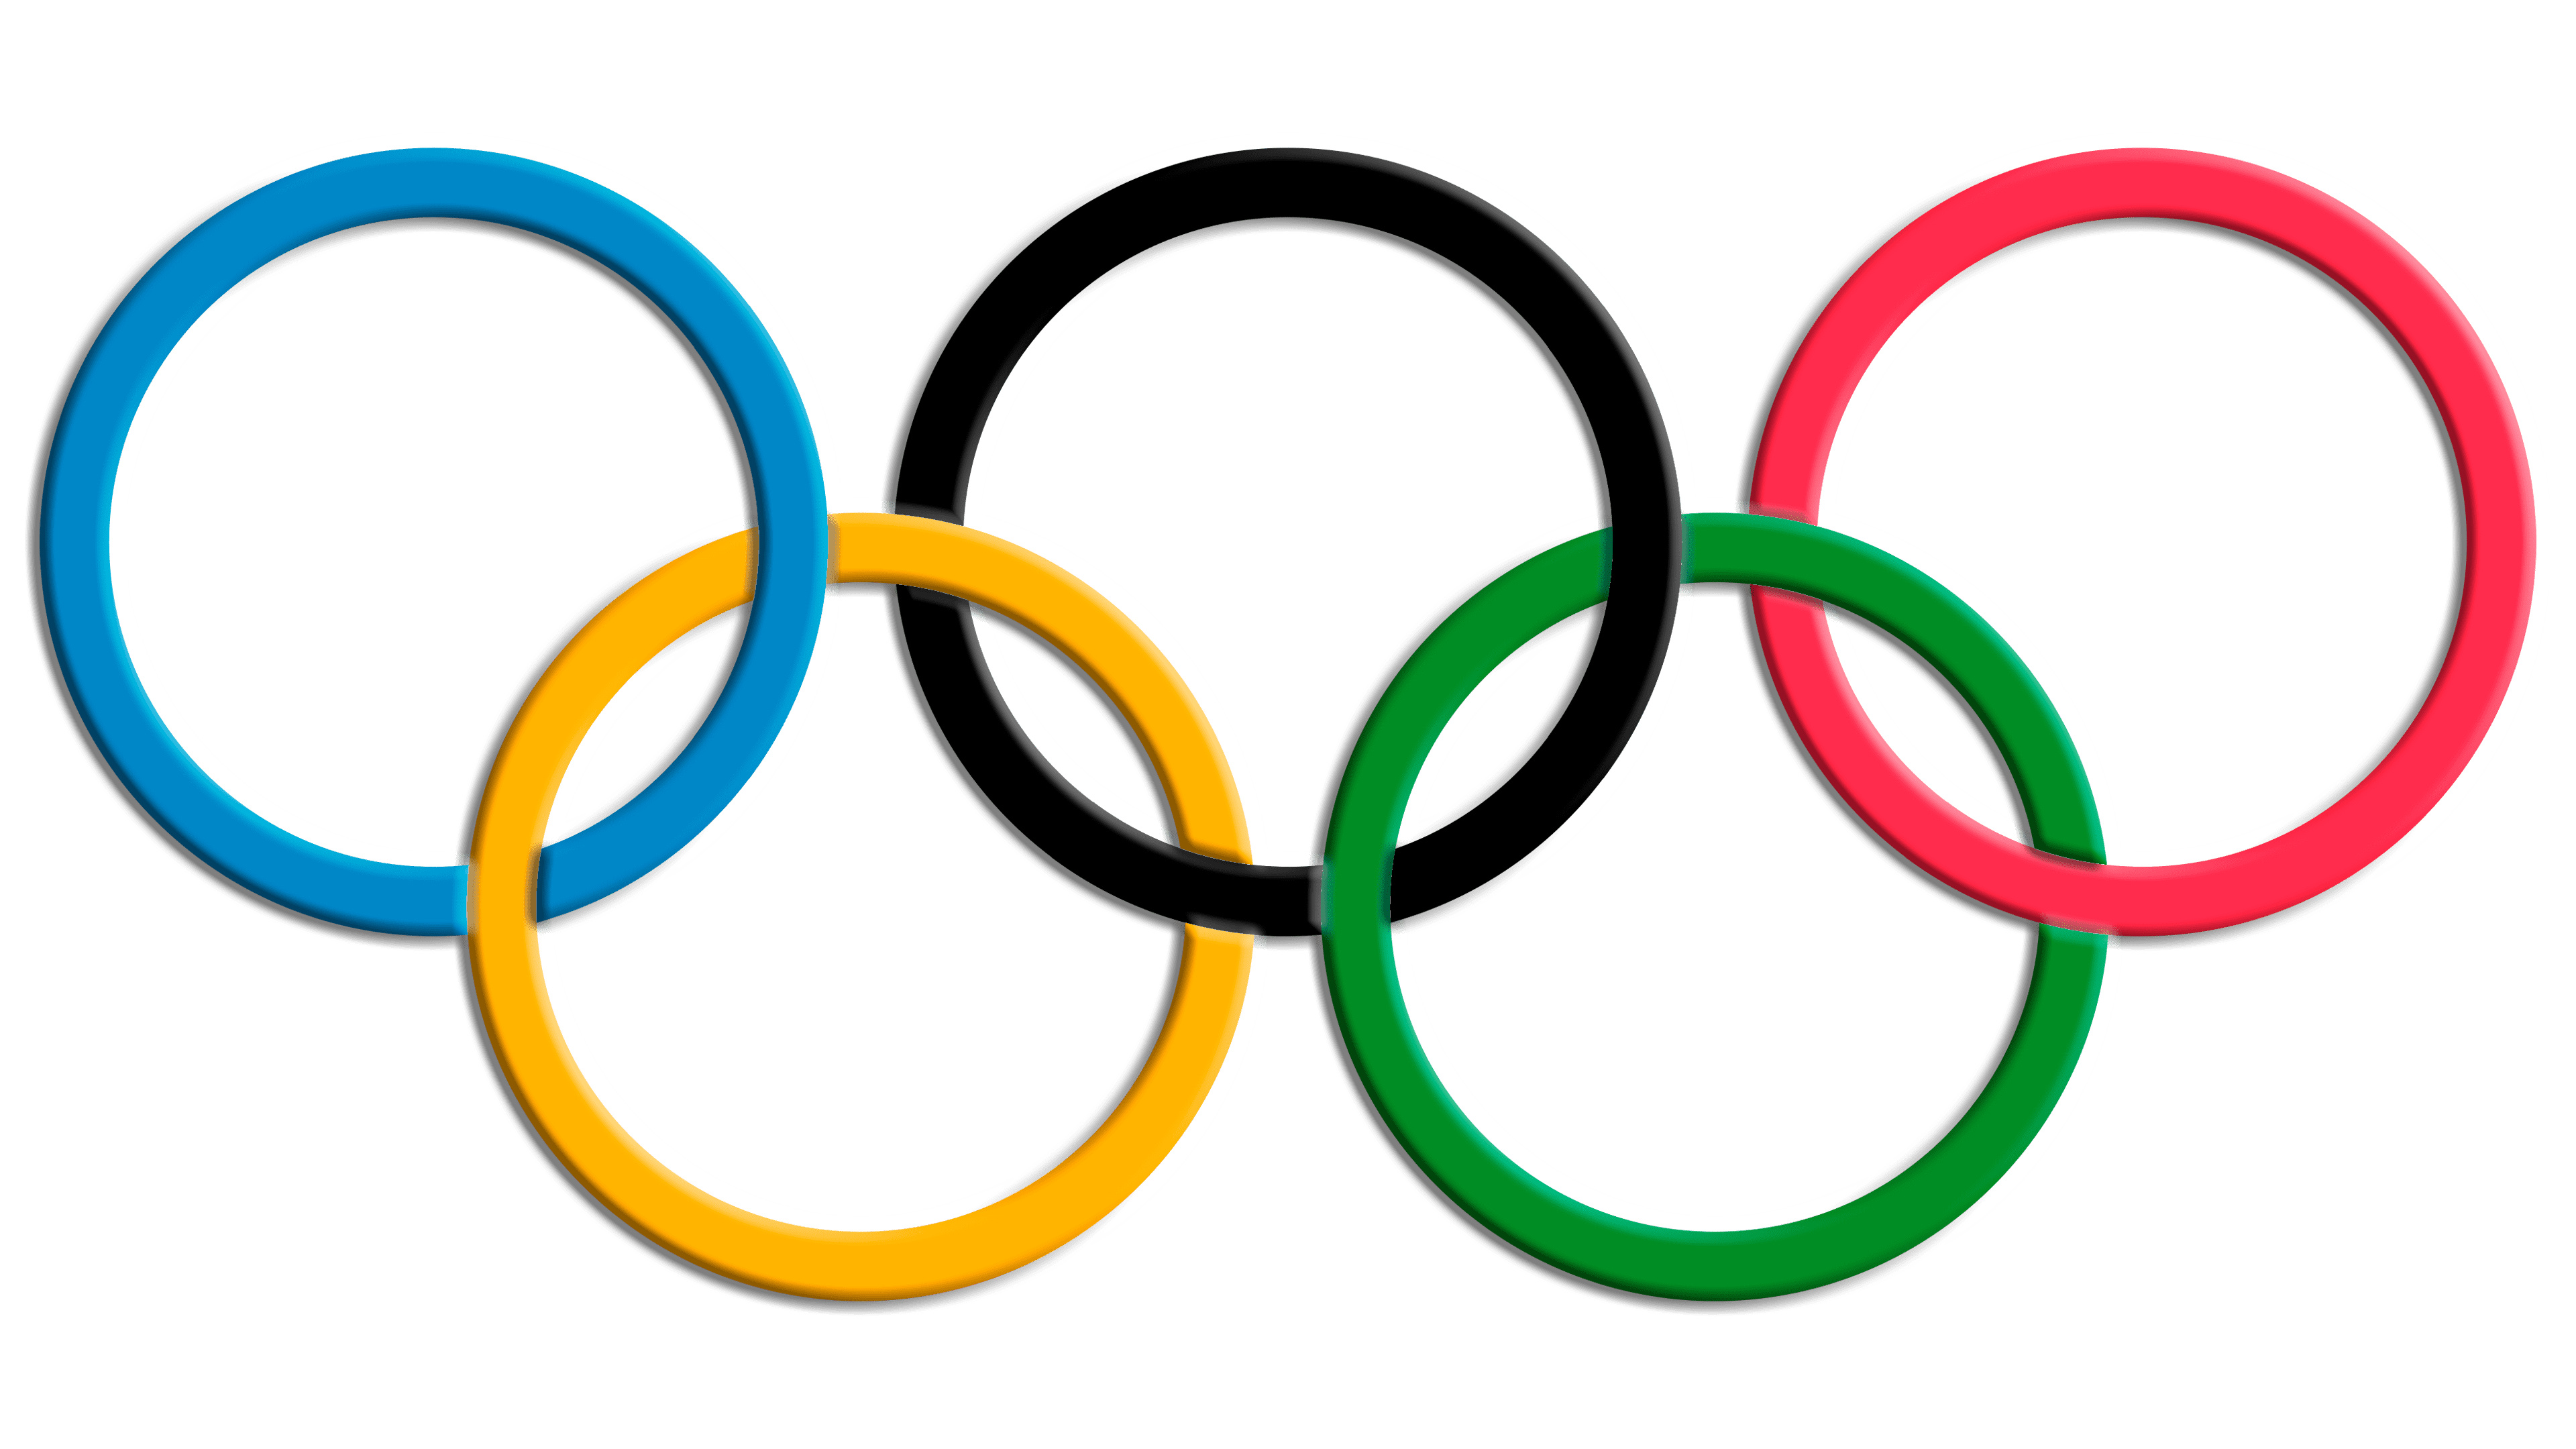 Olympics: Symbolic, Five interlocking rings, Coloured blue, yellow, black, green, and red. 3840x2160 4K Wallpaper.